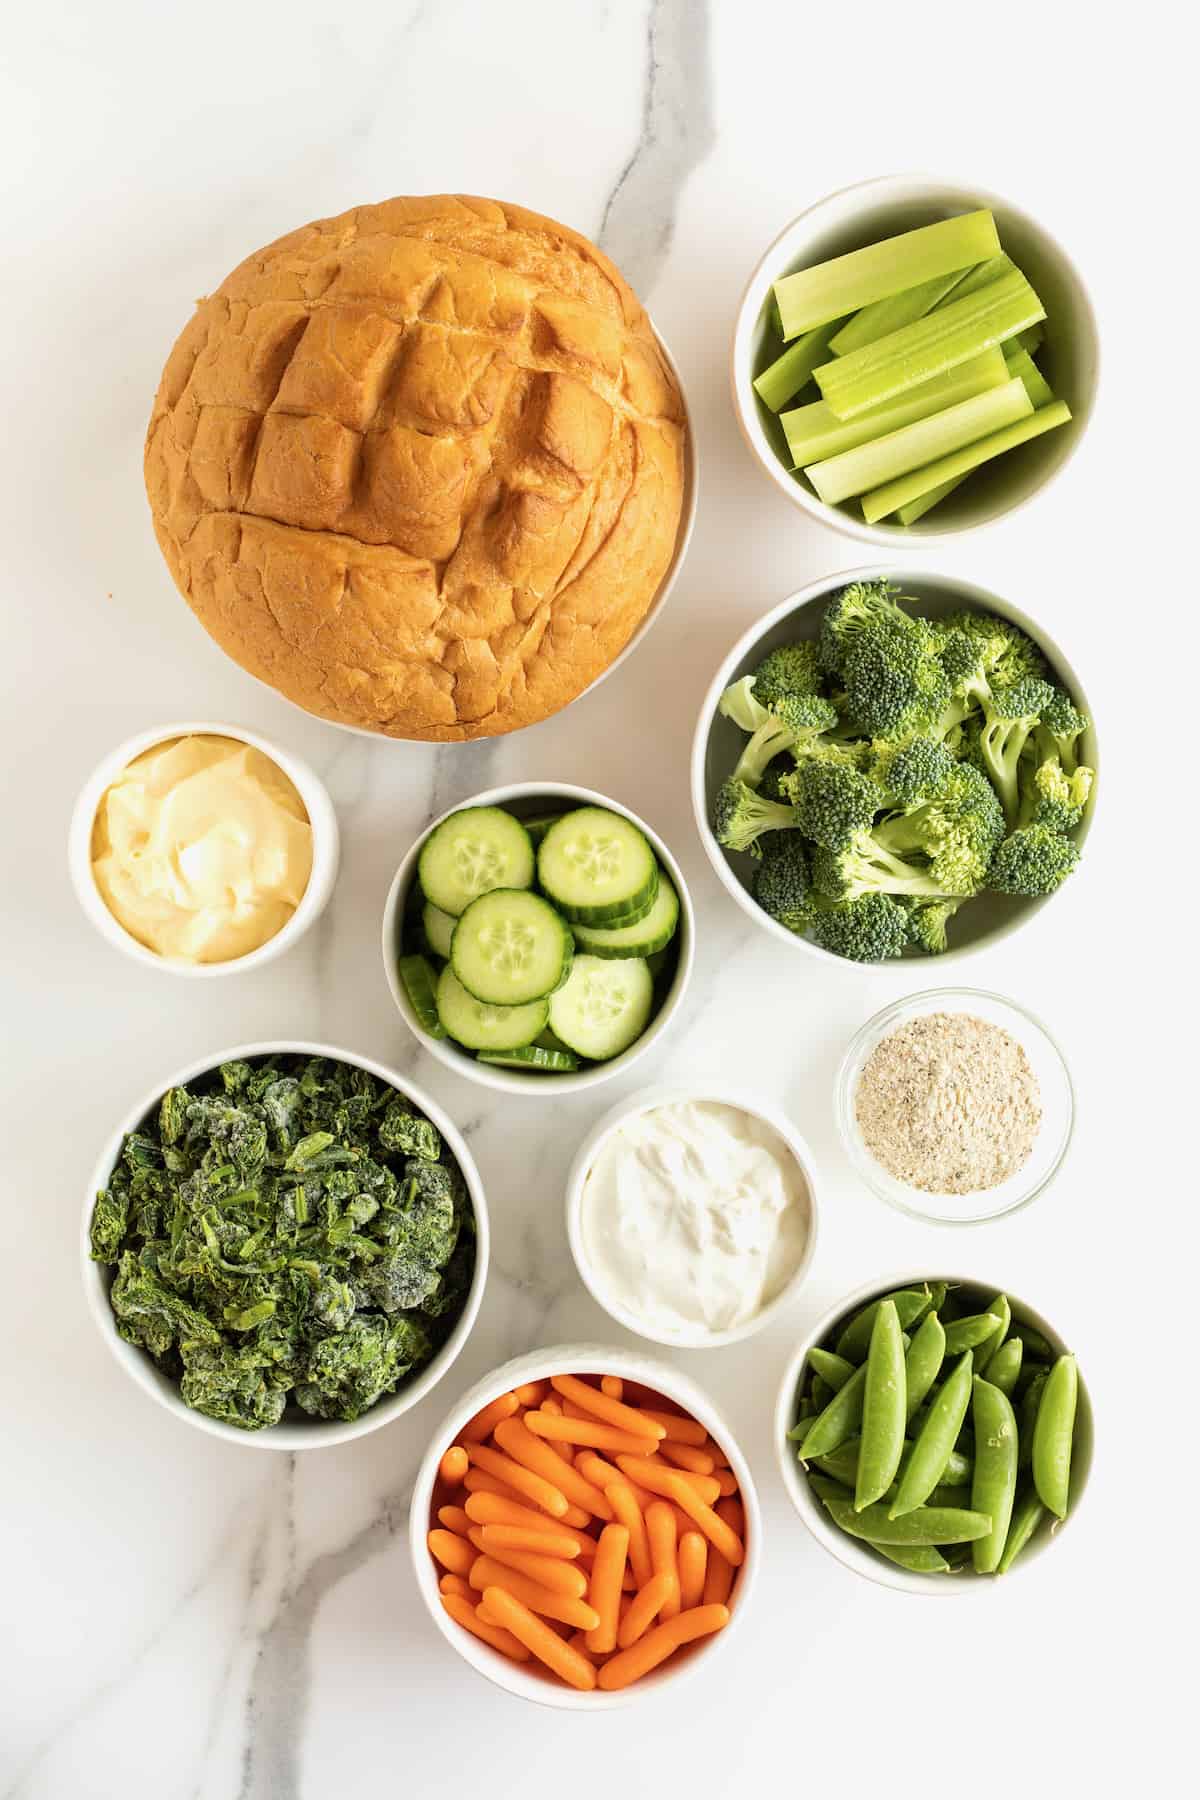 A bread bowl, cucumber slices, broccoli florets, carrot sticks, spinach and cream cheese for a spinach dip.